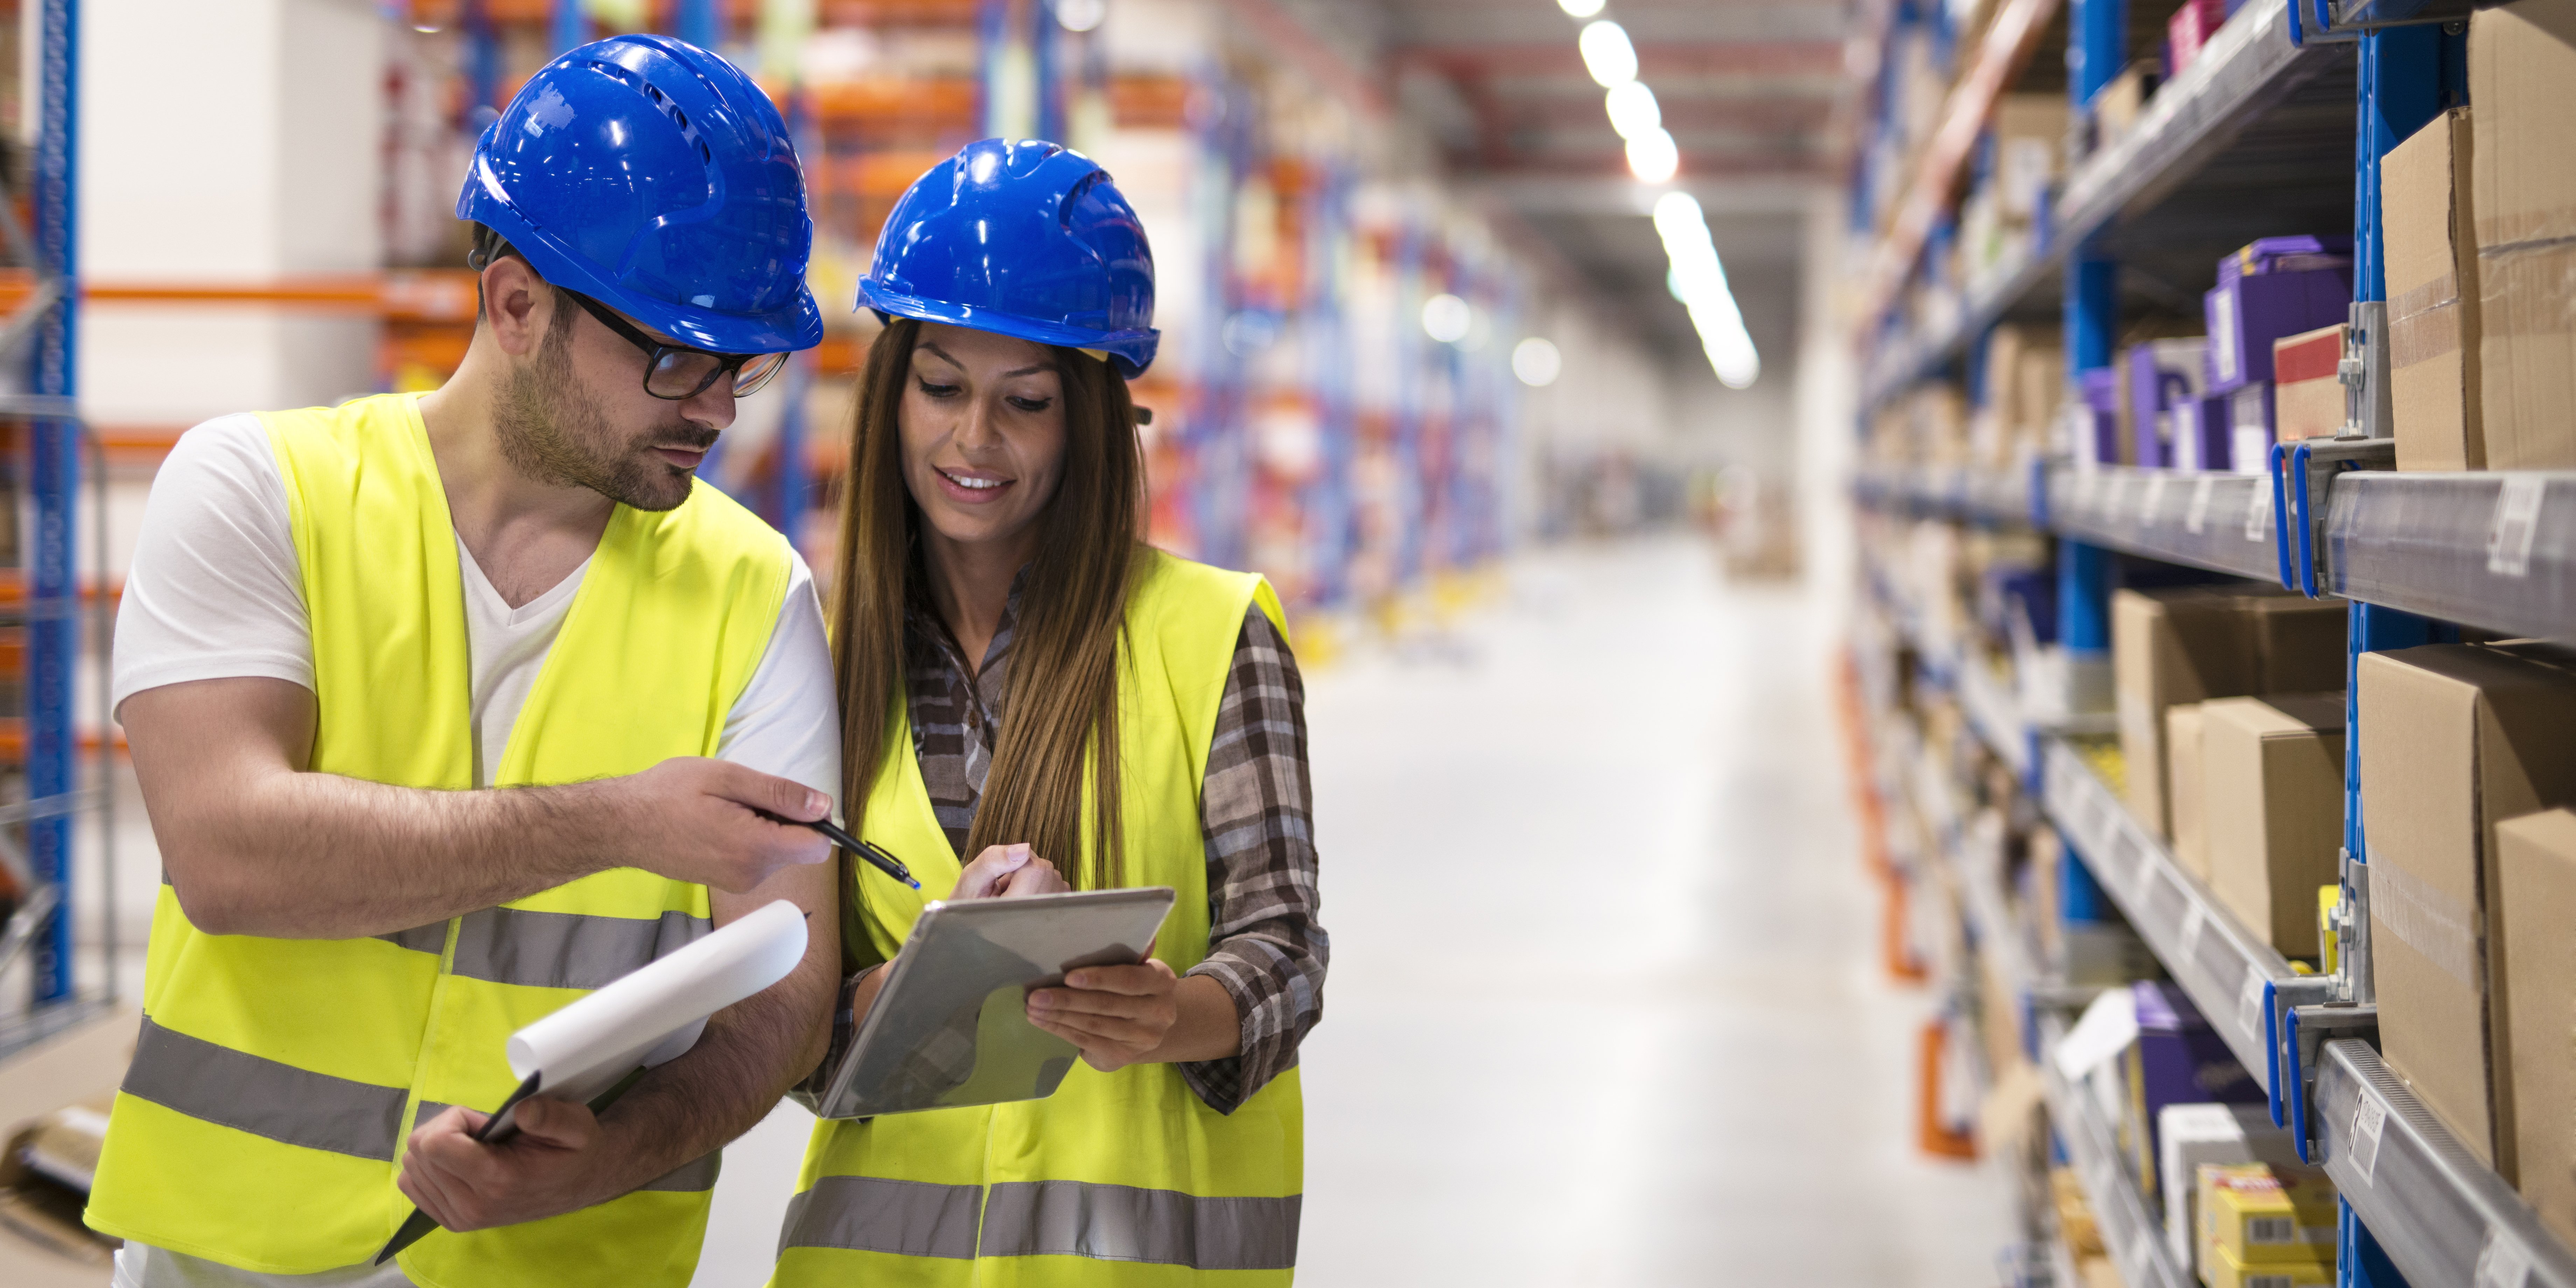 warehouse-workers-checking-inventory-consulting-each-other-about-organization-distribution-goods